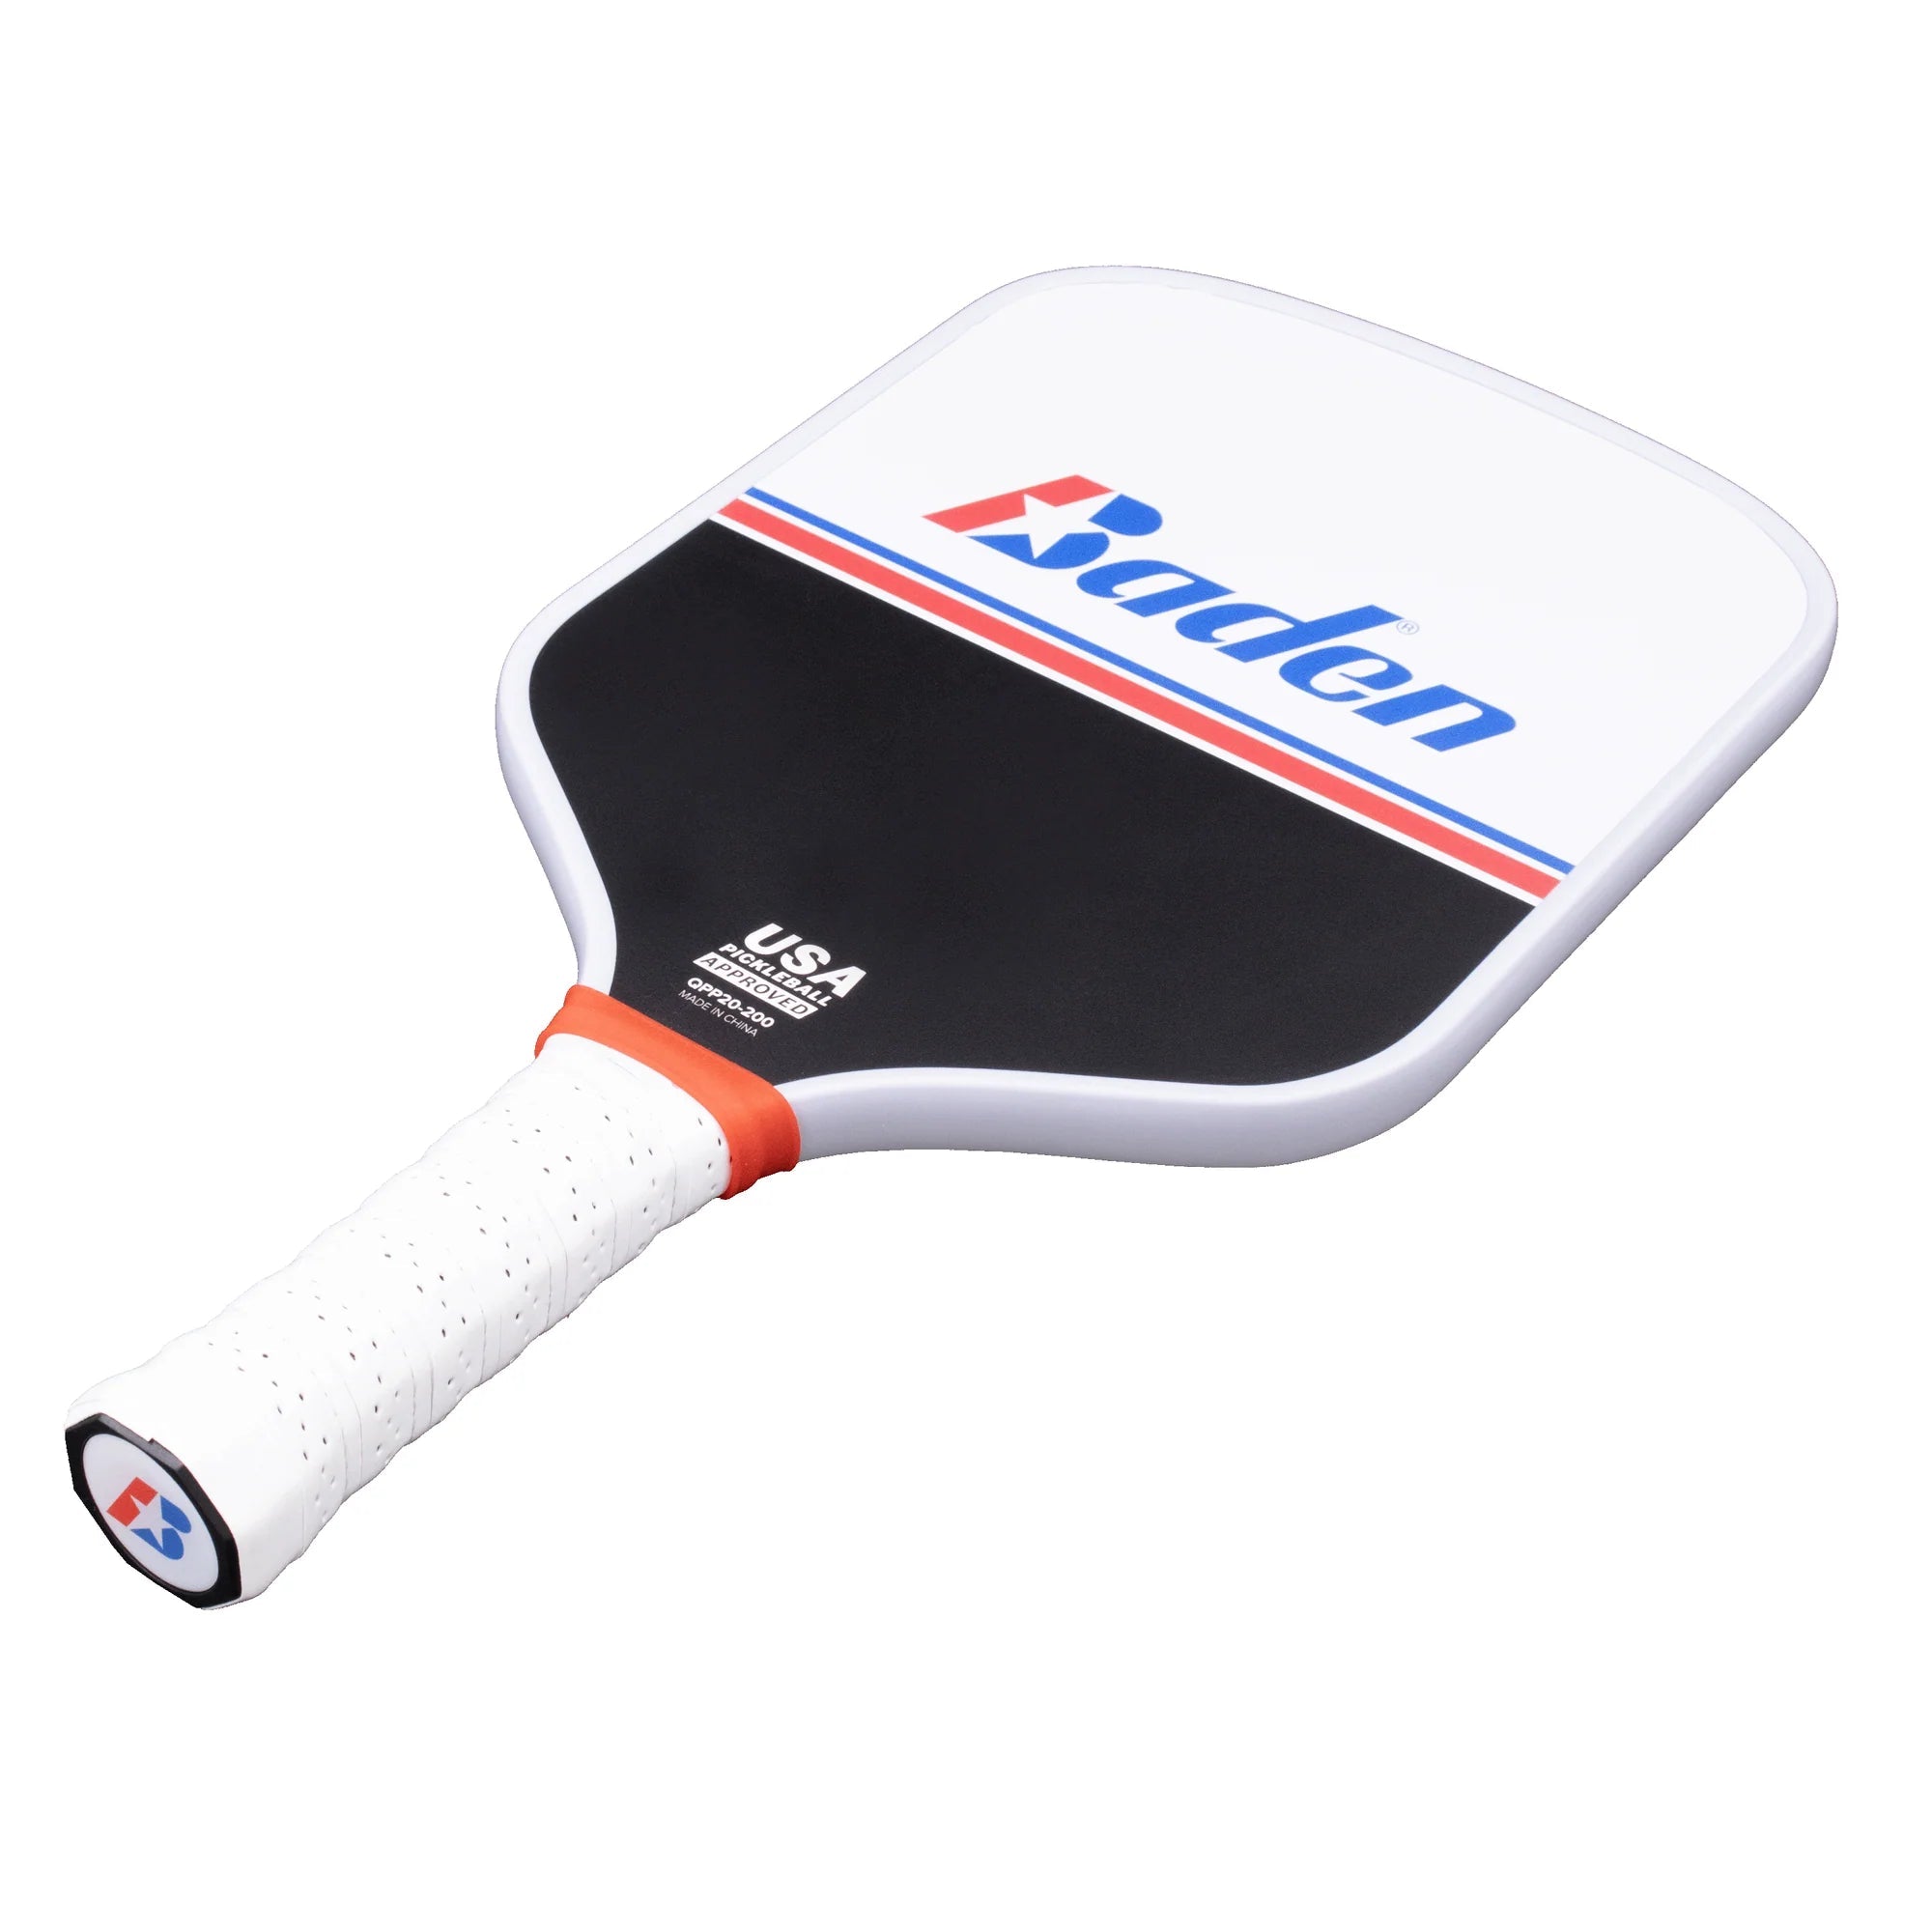 Battle Point Pickleball Paddle by Baden - Pitch Machine Pros